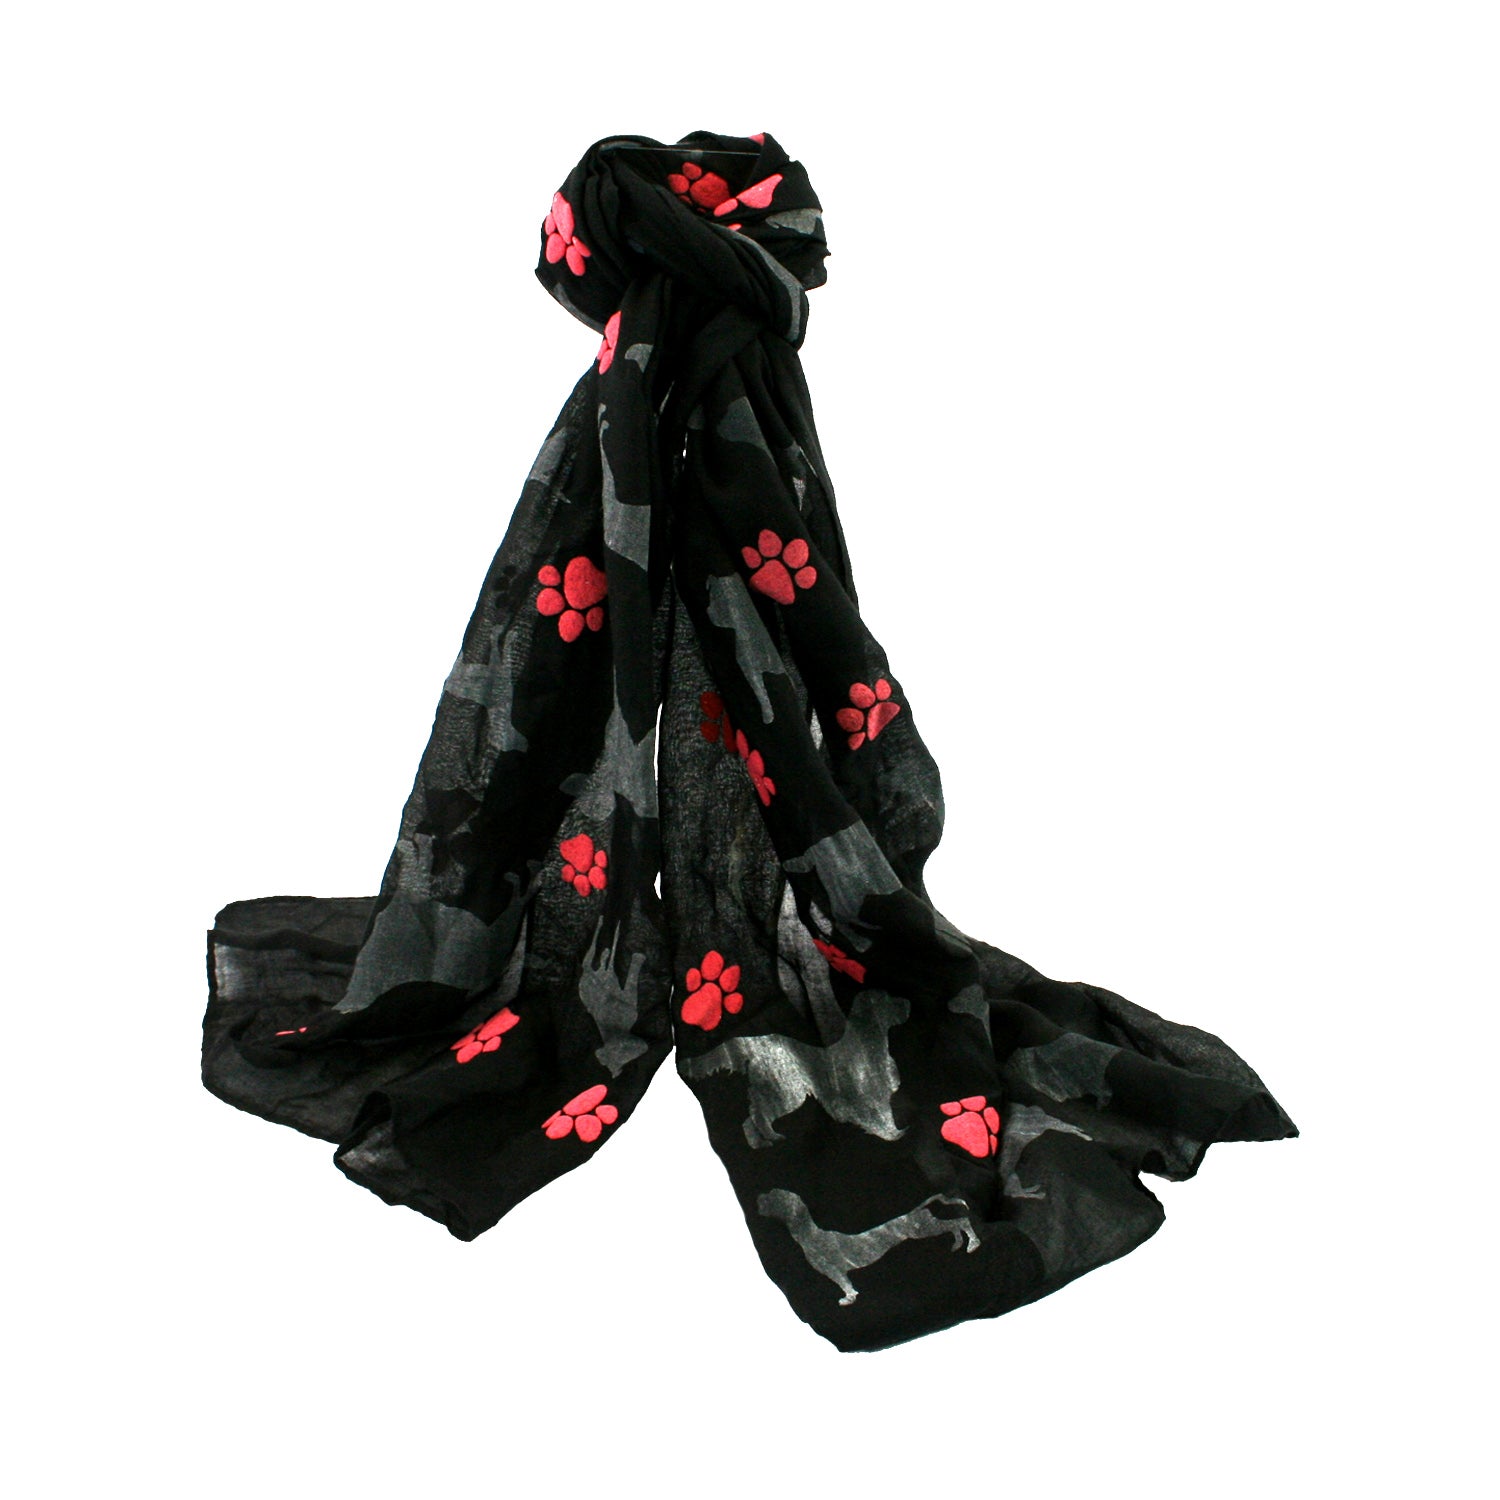 Dog Lover Gifts available at Dog Krazy Gifts - Black Dog and Paws Scarf, Red paw prints and various silver dogs including Boxers, Staffies and German Shepherd. Available from Dog Krazy Gifts